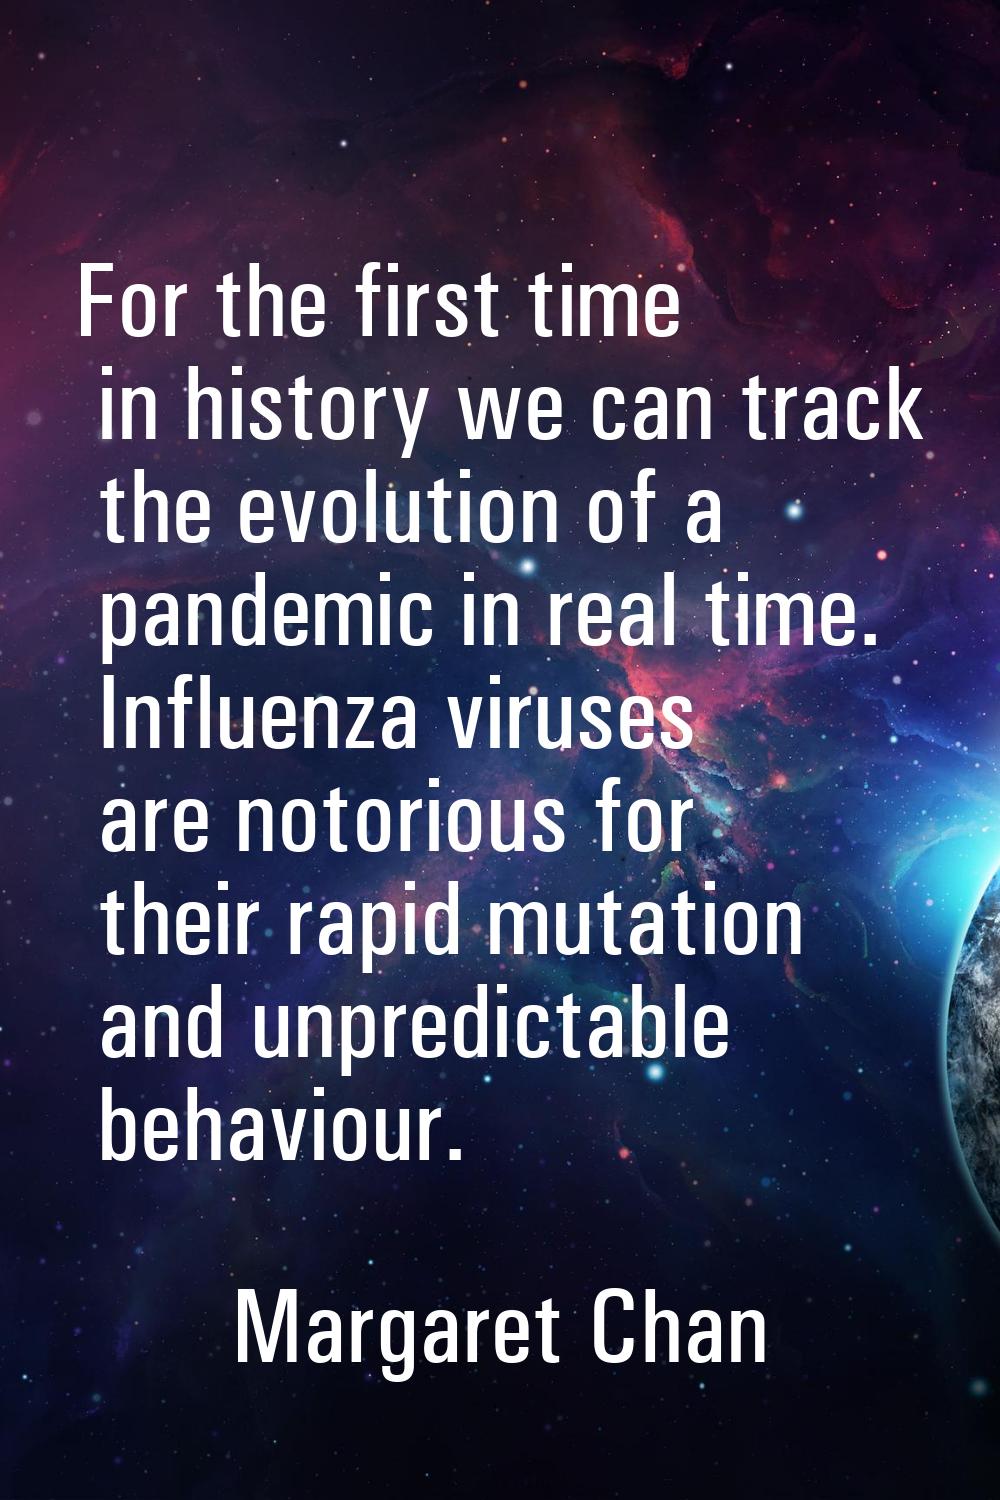 For the first time in history we can track the evolution of a pandemic in real time. Influenza viru